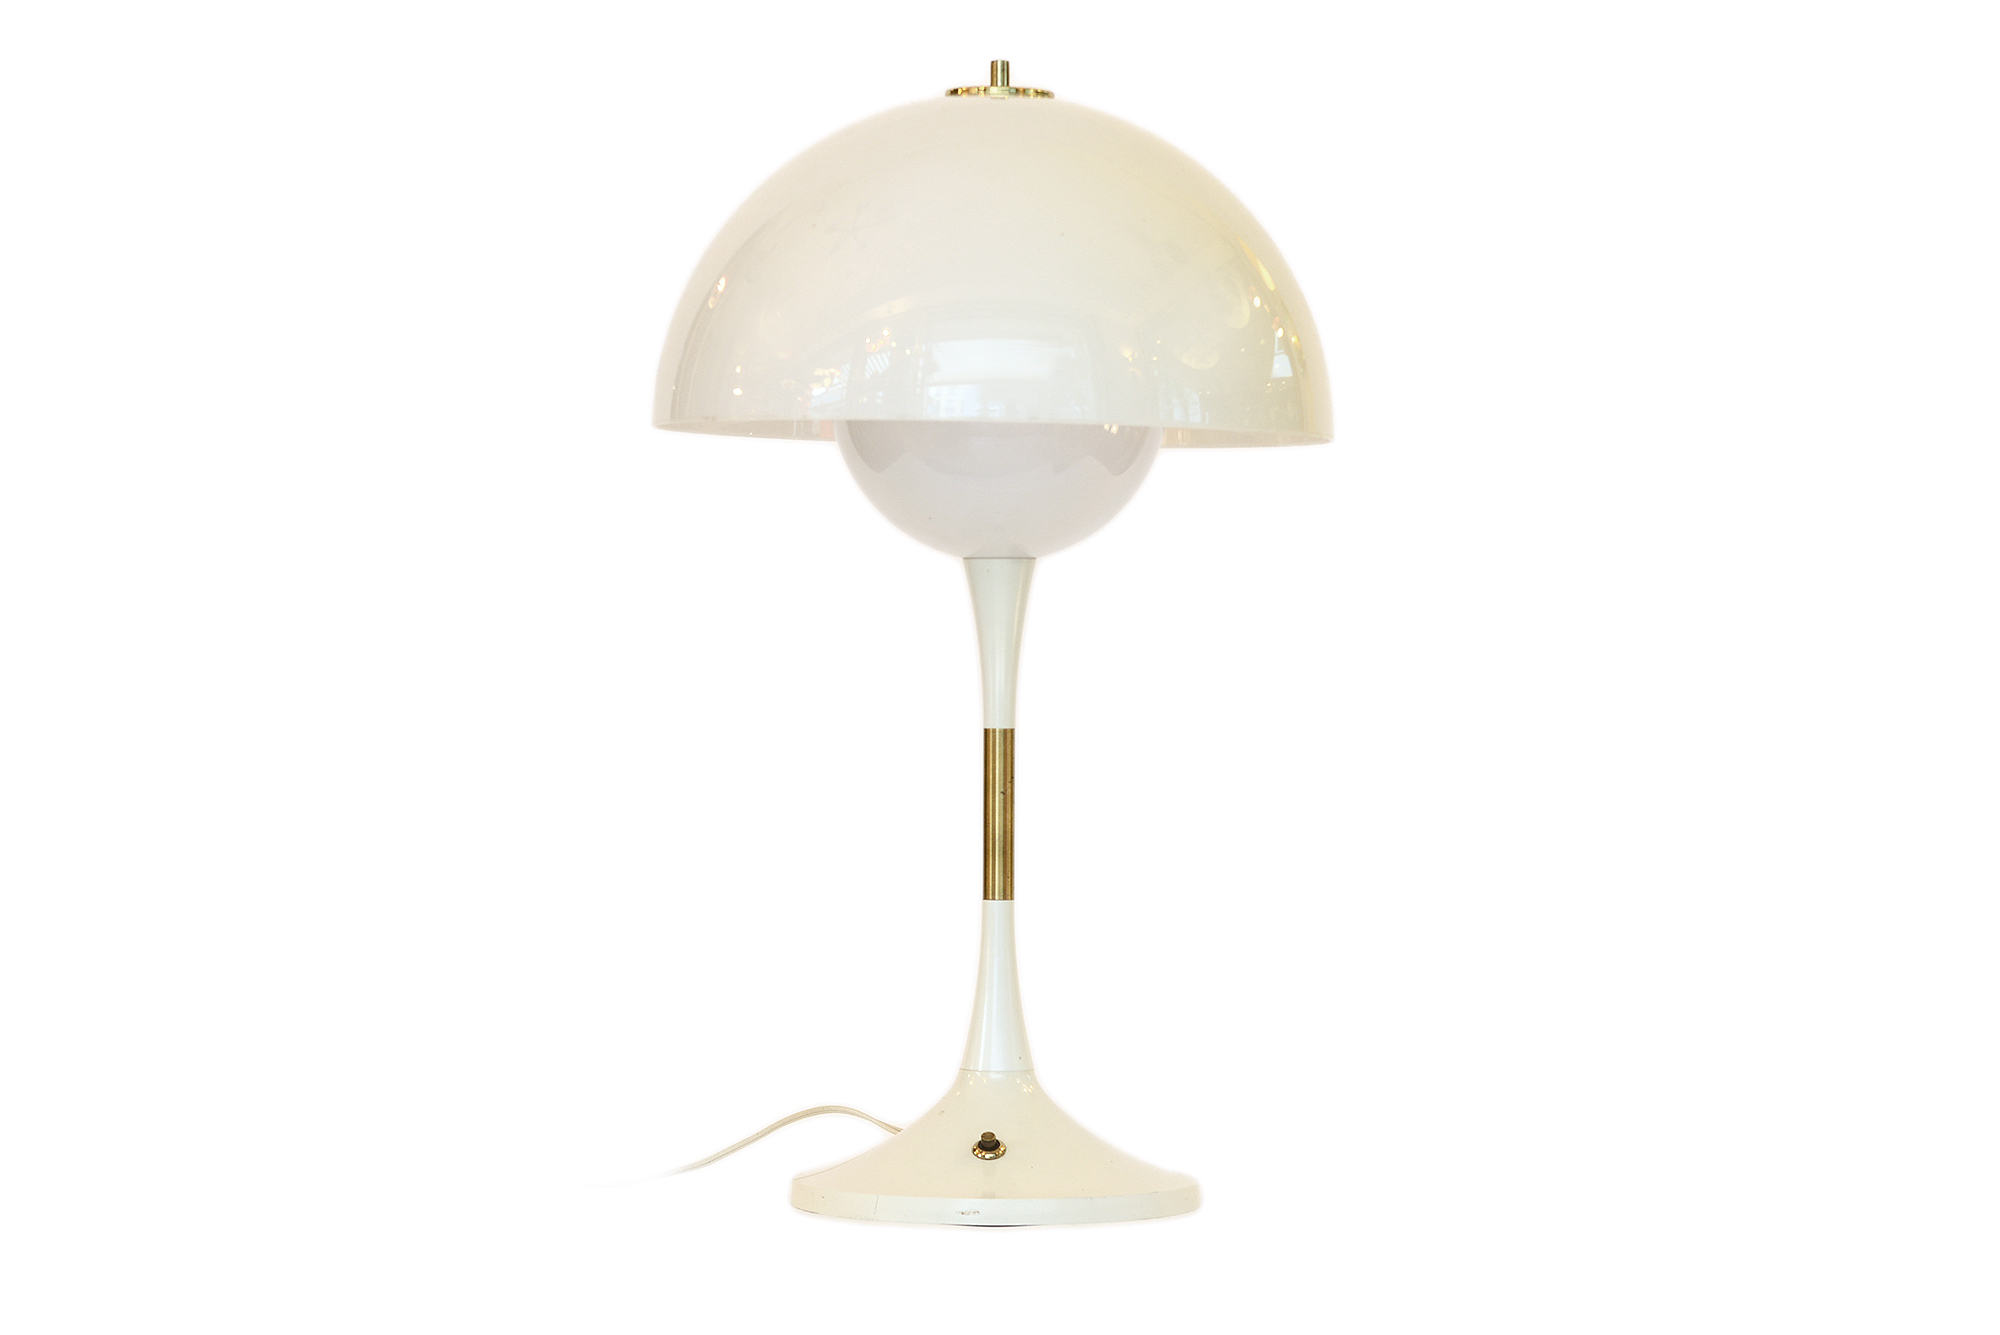 Table light "Trixel" by Bent Karlby for Lyfa. Denmark 1960s